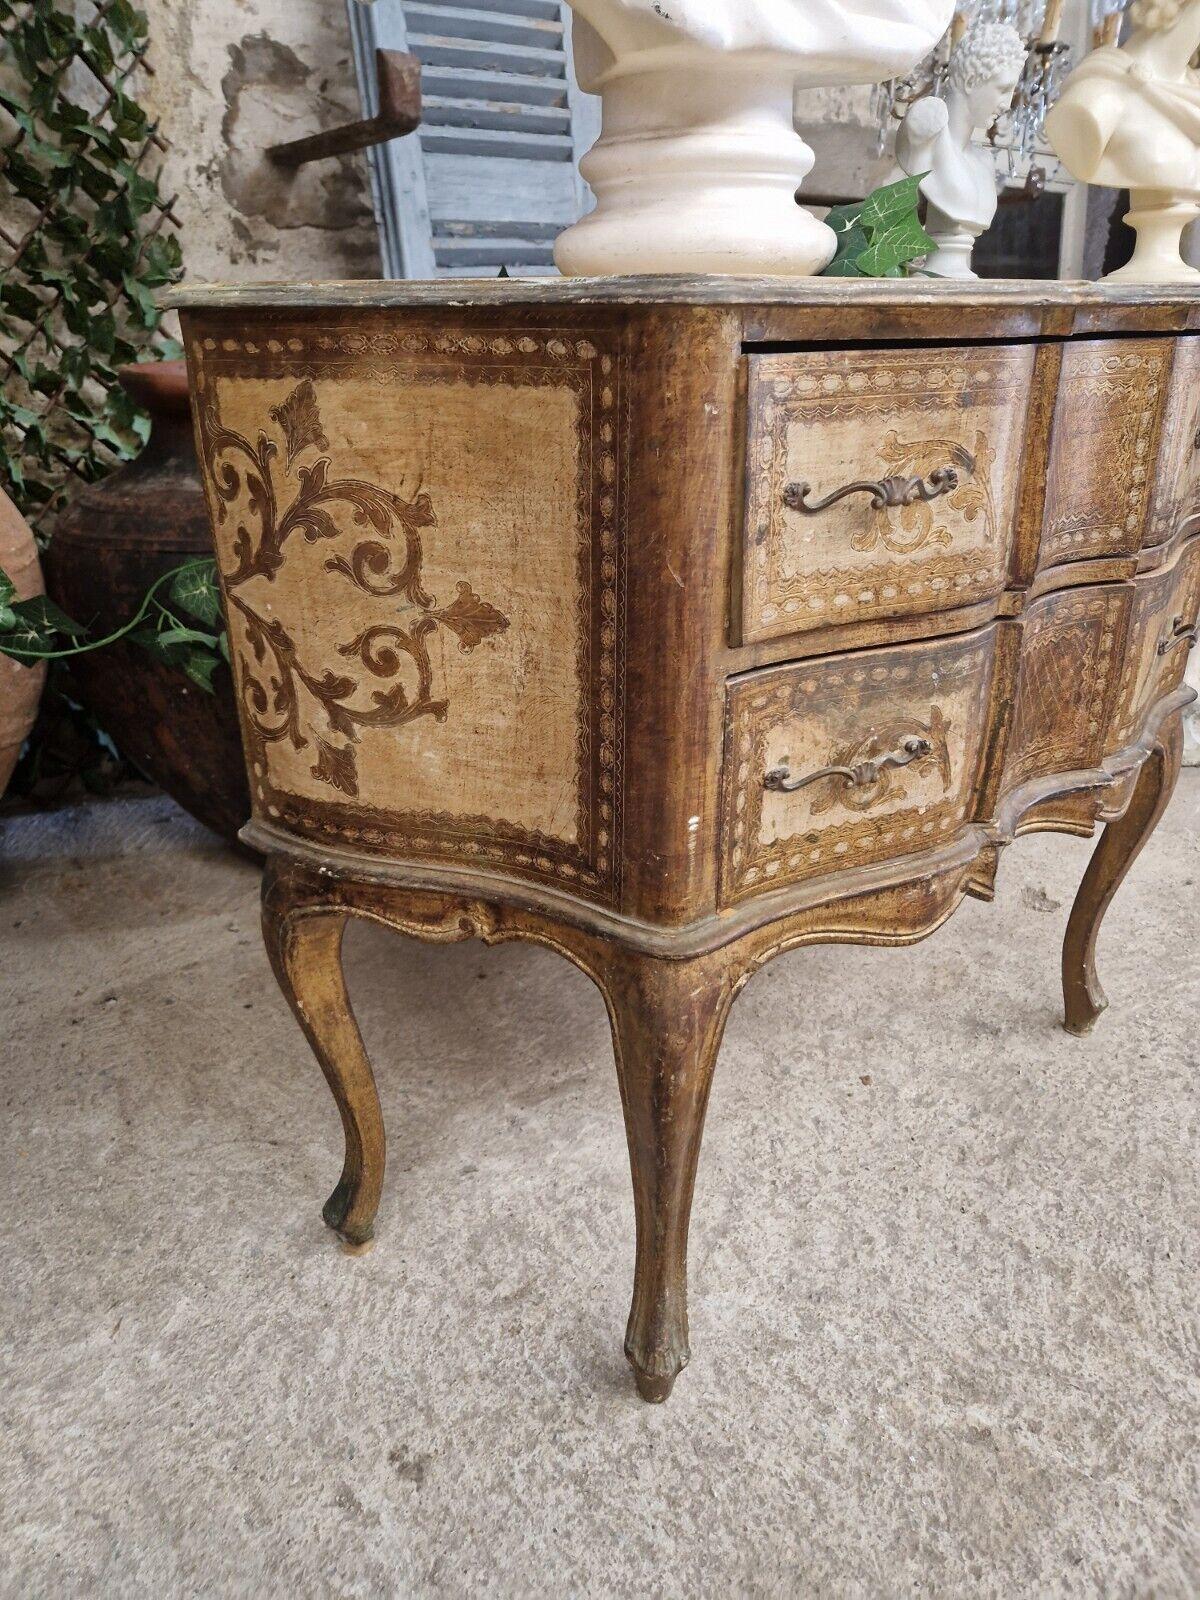 Fabulous Venetian Chest of Drawers 

Louis XV Style Chest of Drawers 

Allow for signs of age and use 

Golden Colours of lacquer

Embossed

2 Drawers 

Gilt Bronze Decorative Work

Early 20th Century



Dimensions 

H 82cm x W 100 cm x D 40 cm